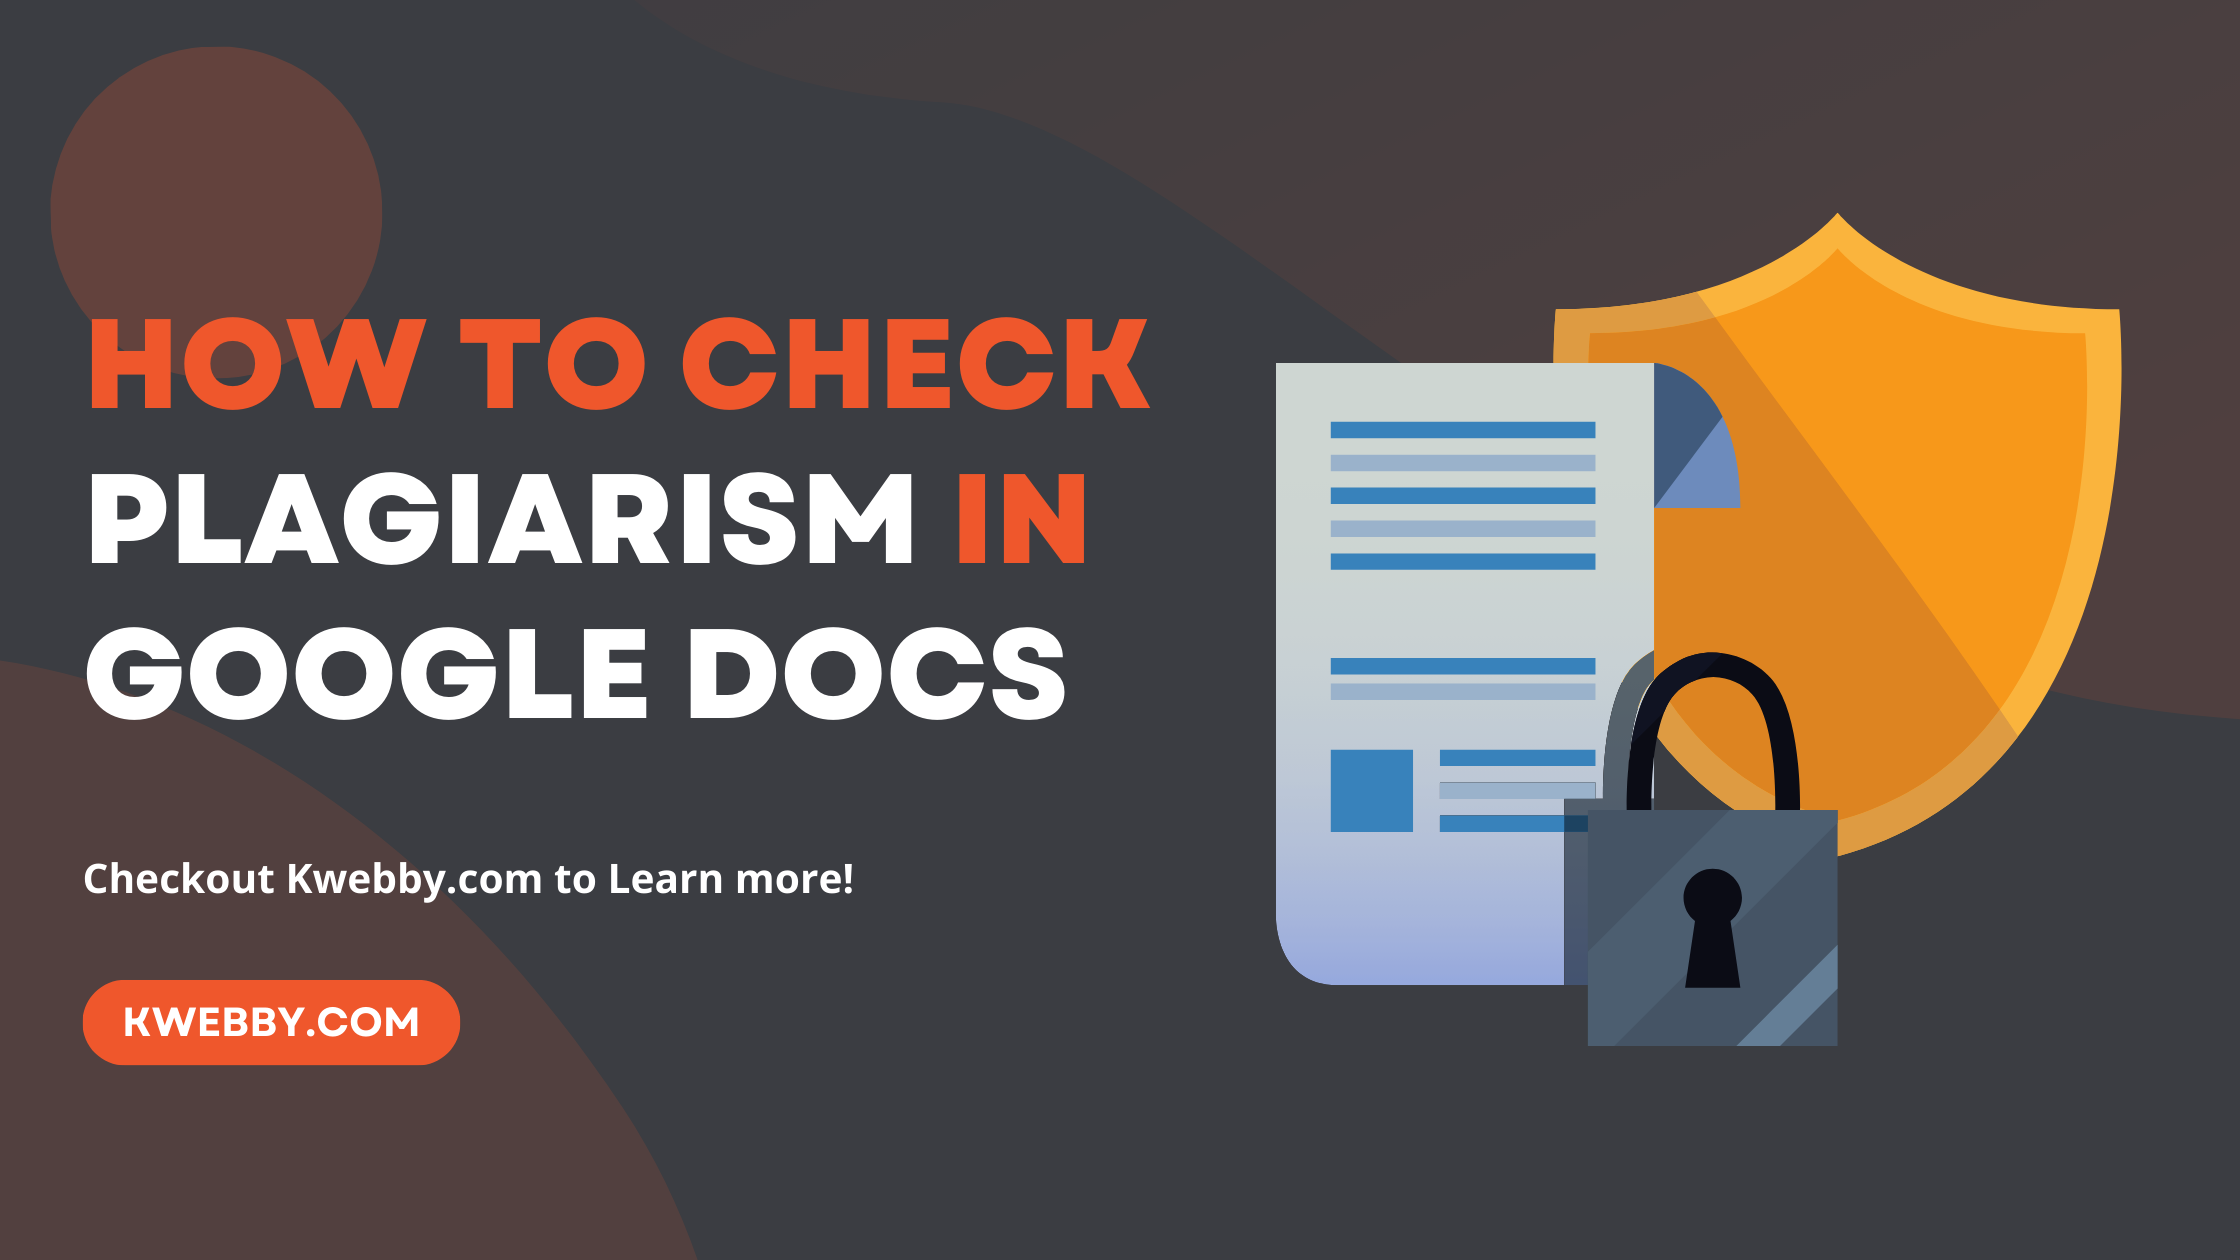 How to Check Plagiarism in Google Docs